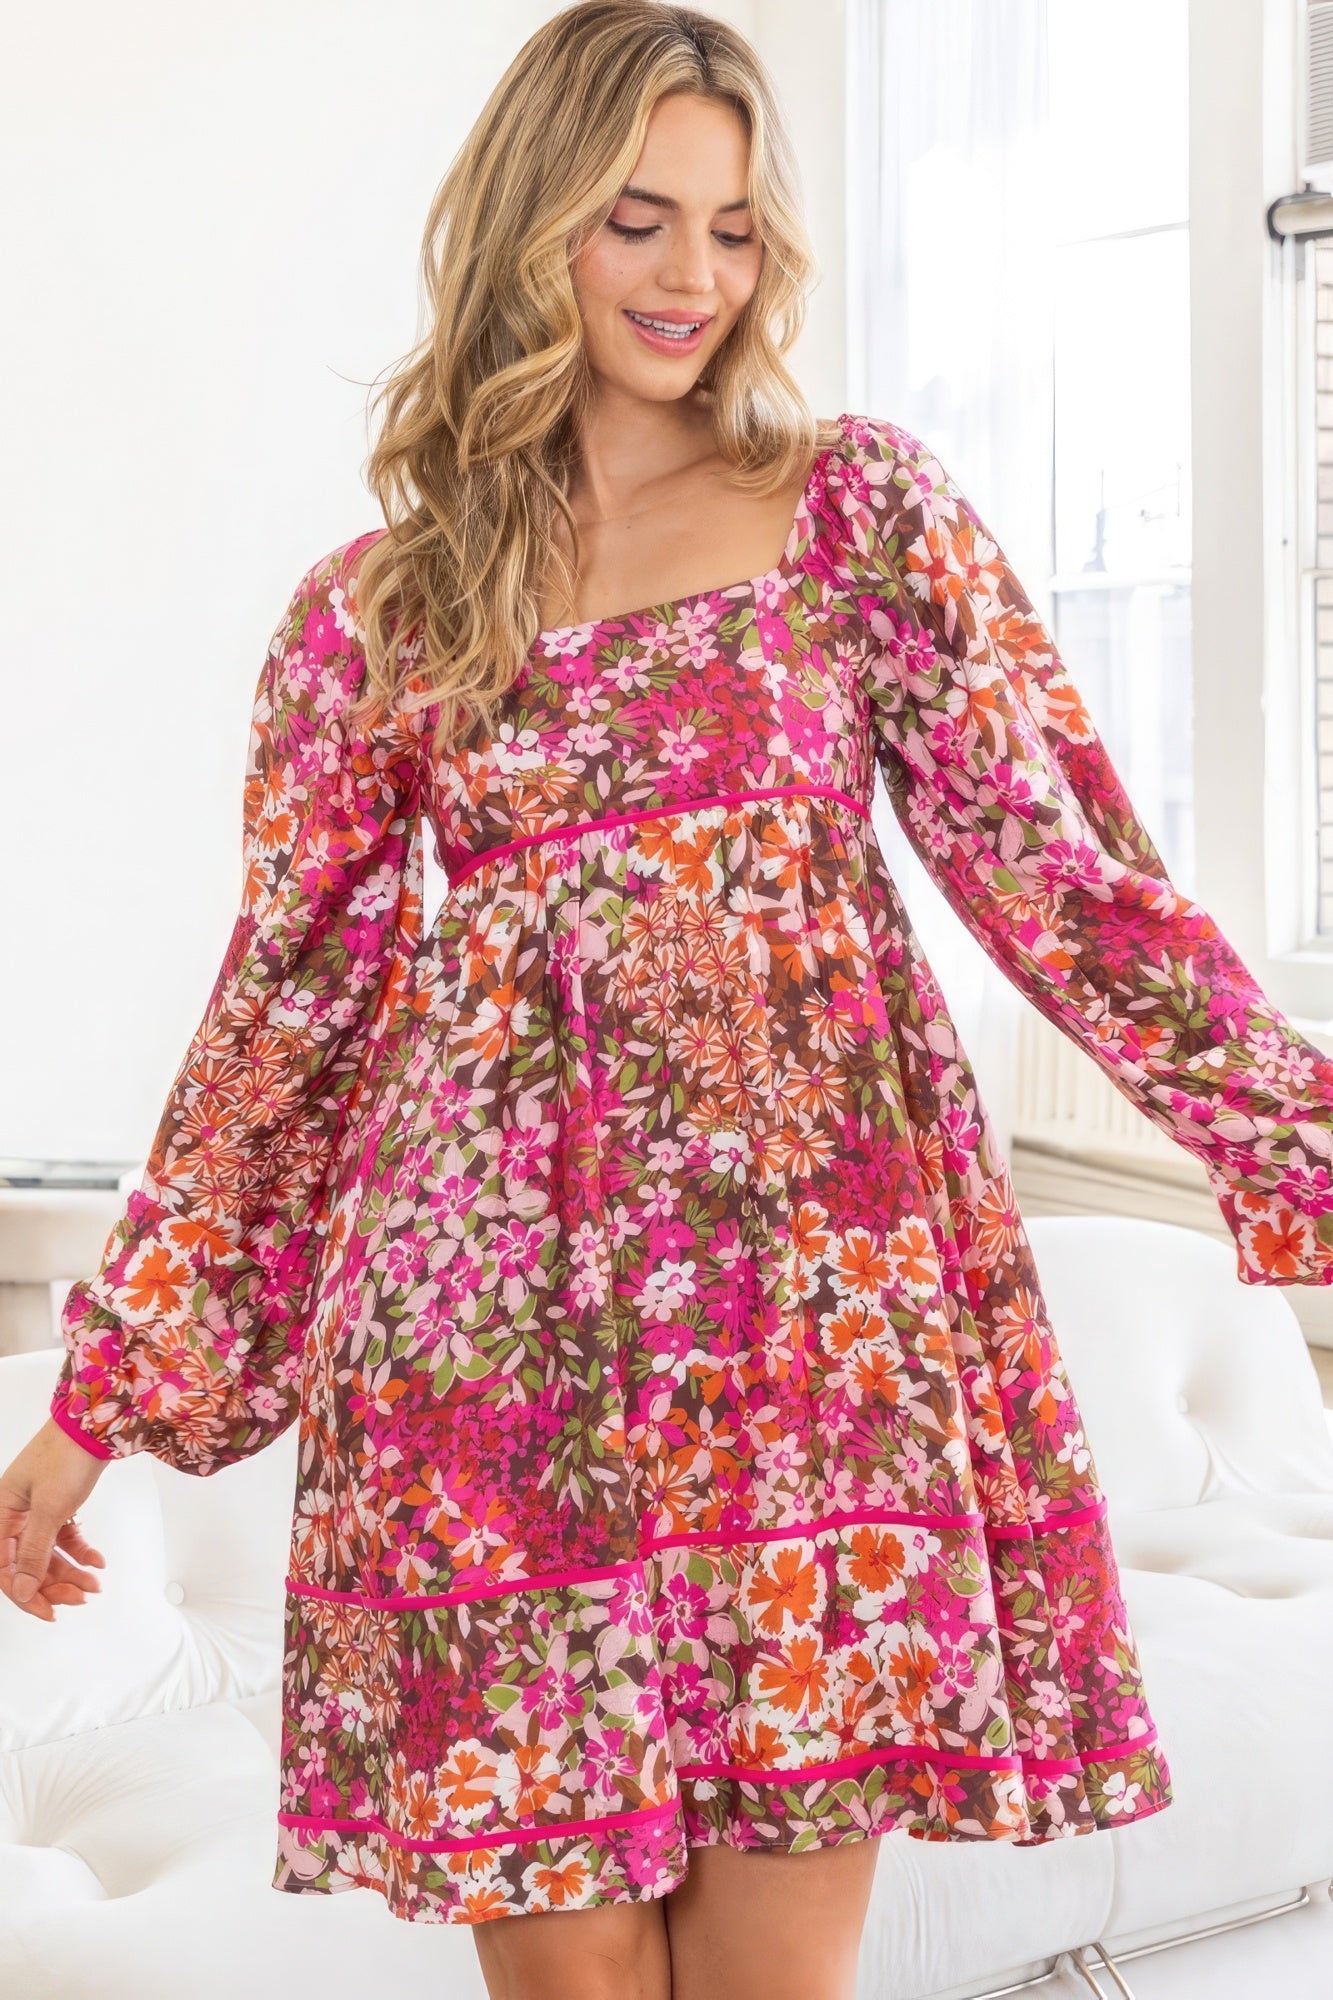 Baby Doll Floral Dress